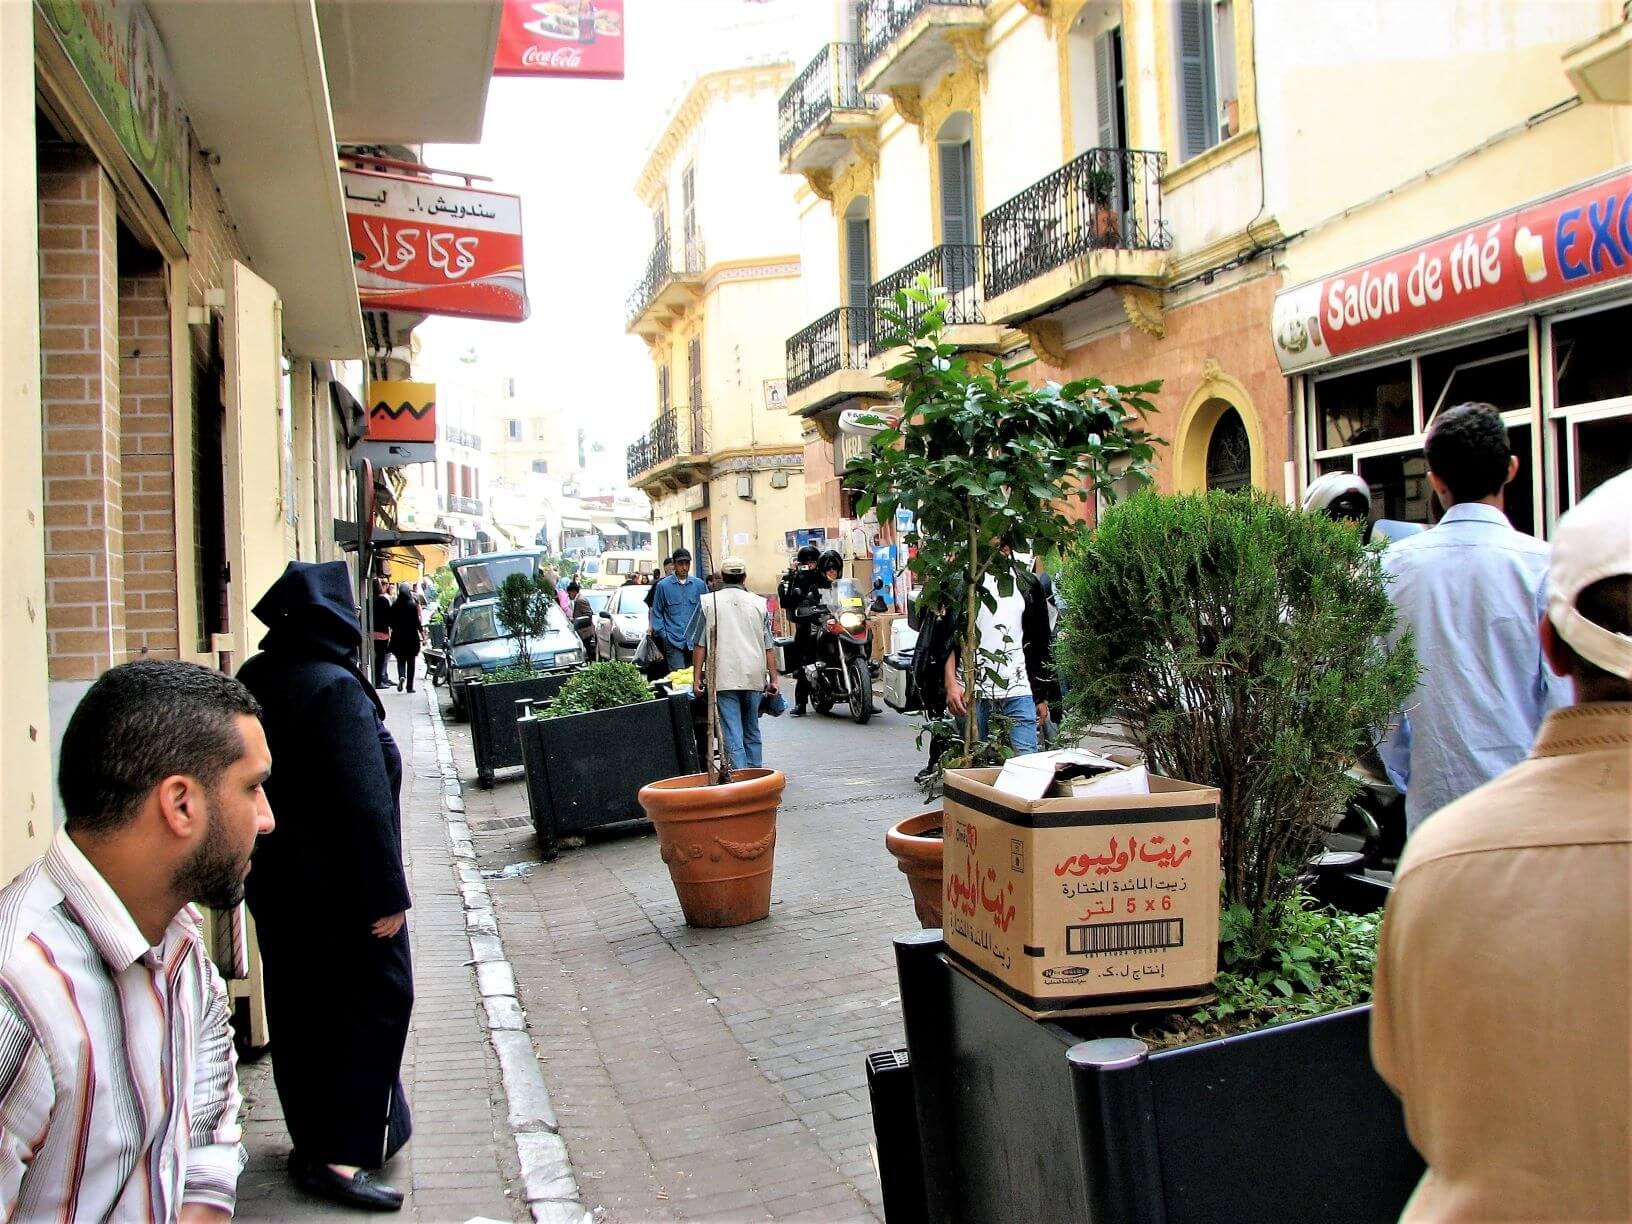 streets of Tangier, Morocco with people and buildings.